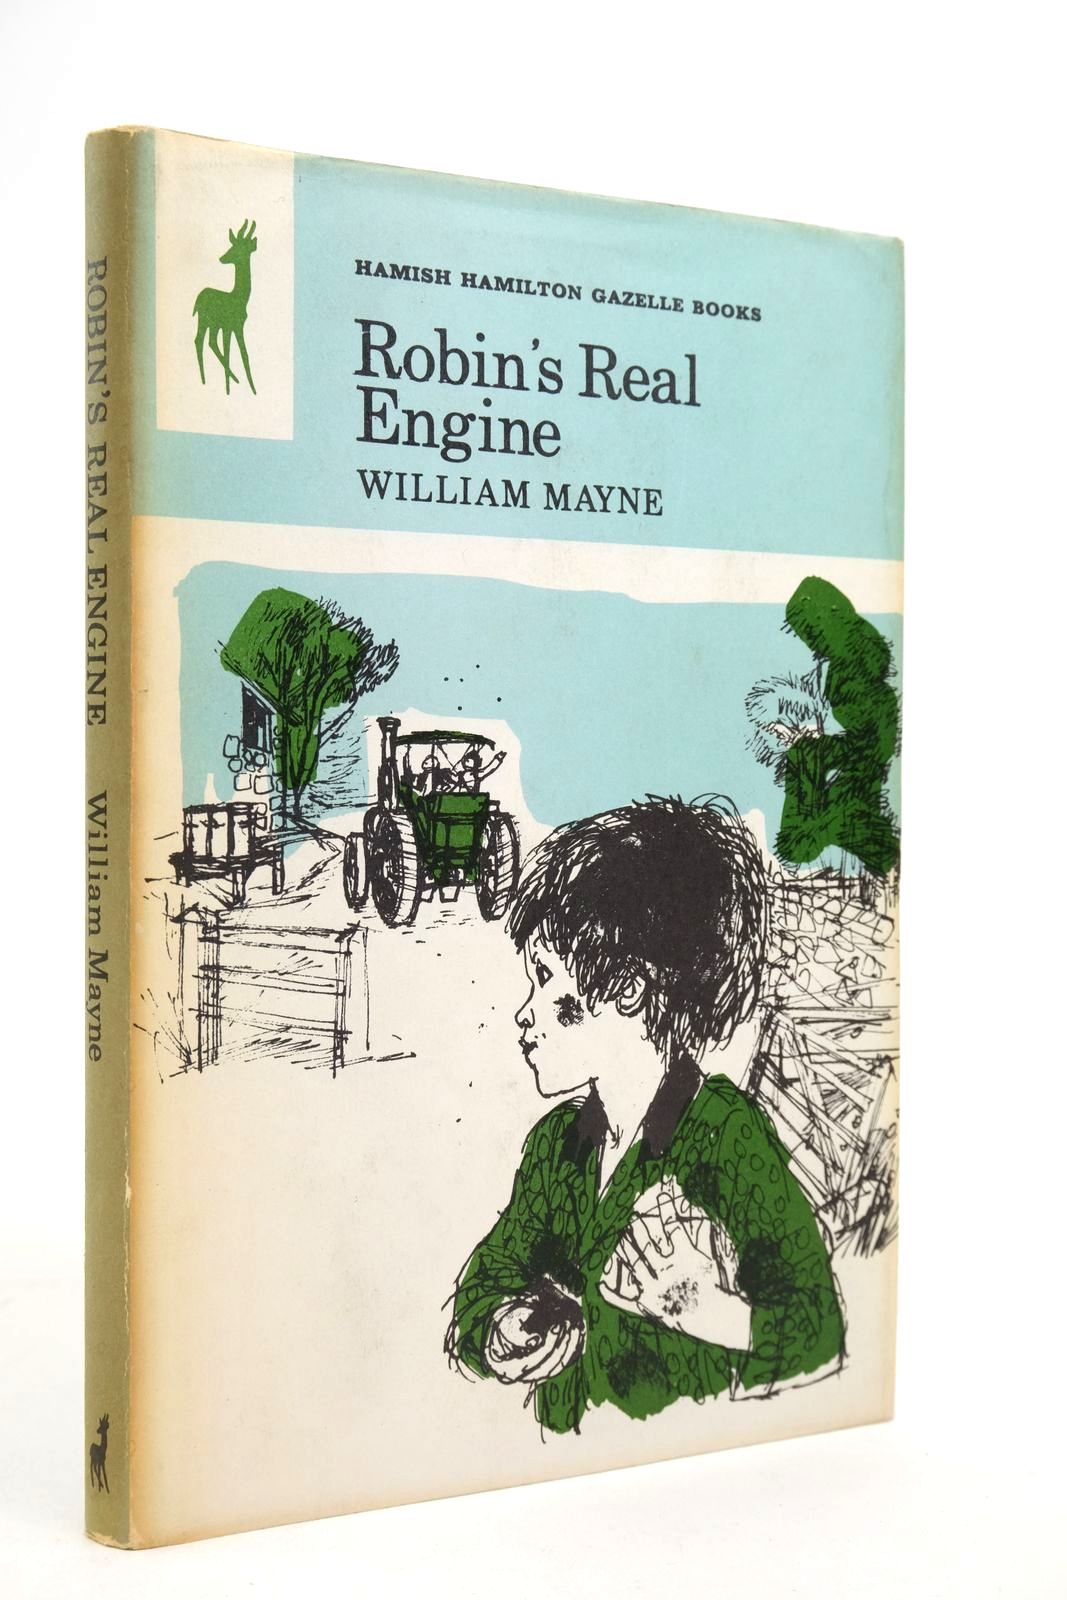 Photo of ROBIN'S REAL ENGINE written by Mayne, William illustrated by Nerman, Einar published by Hamish Hamilton (STOCK CODE: 2140266)  for sale by Stella & Rose's Books